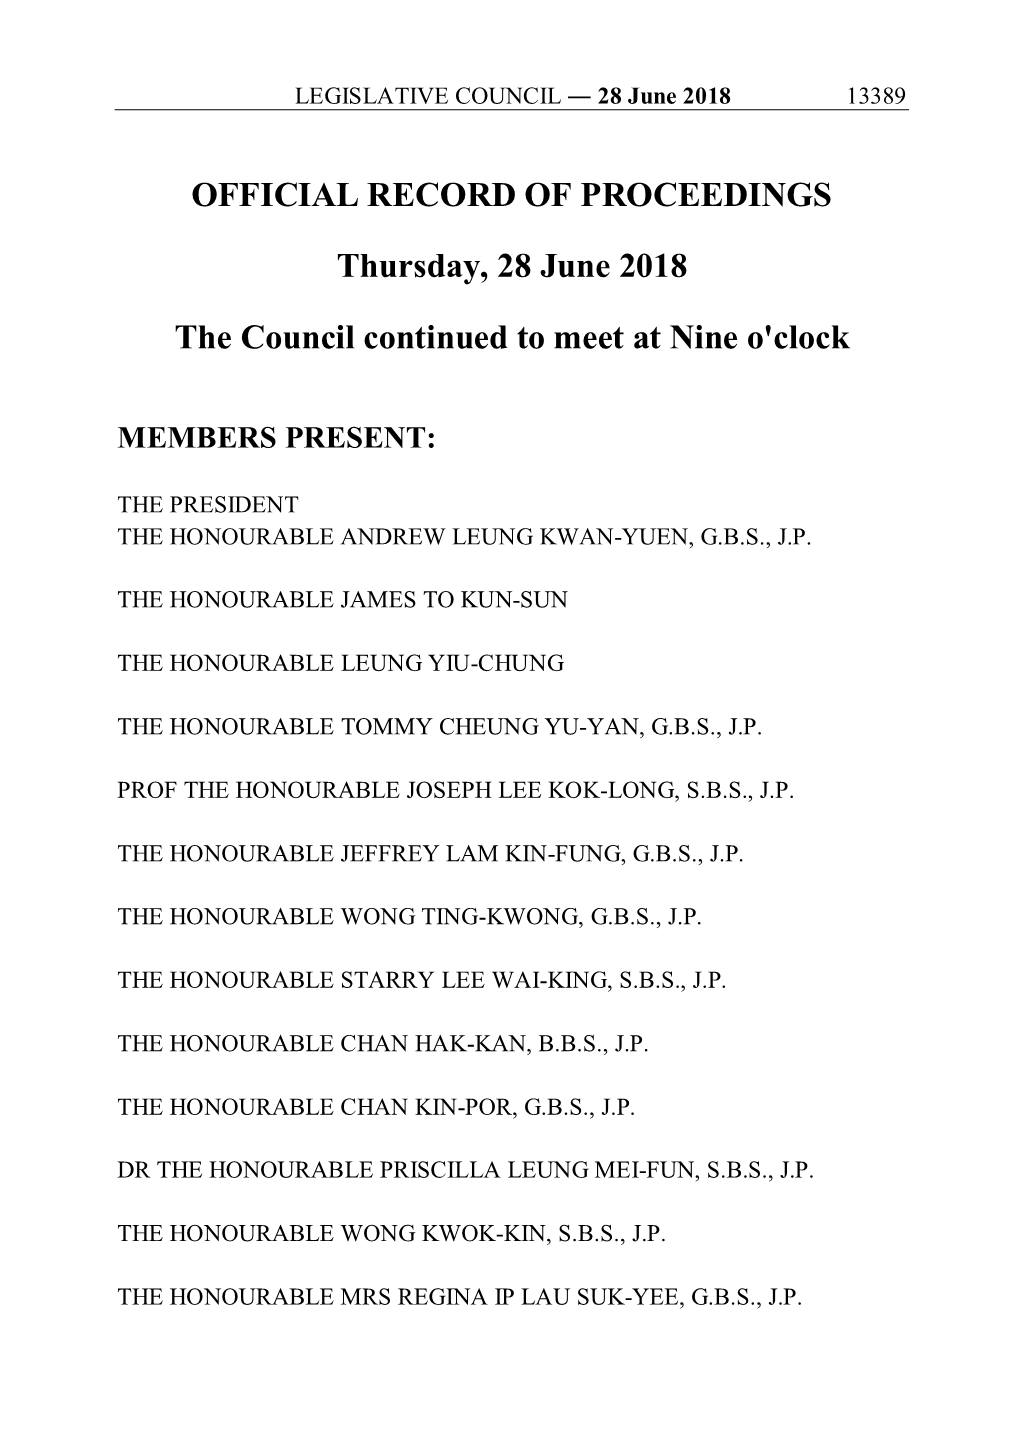 OFFICIAL RECORD of PROCEEDINGS Thursday, 28 June 2018 the Council Continued to Meet at Nine O'clock